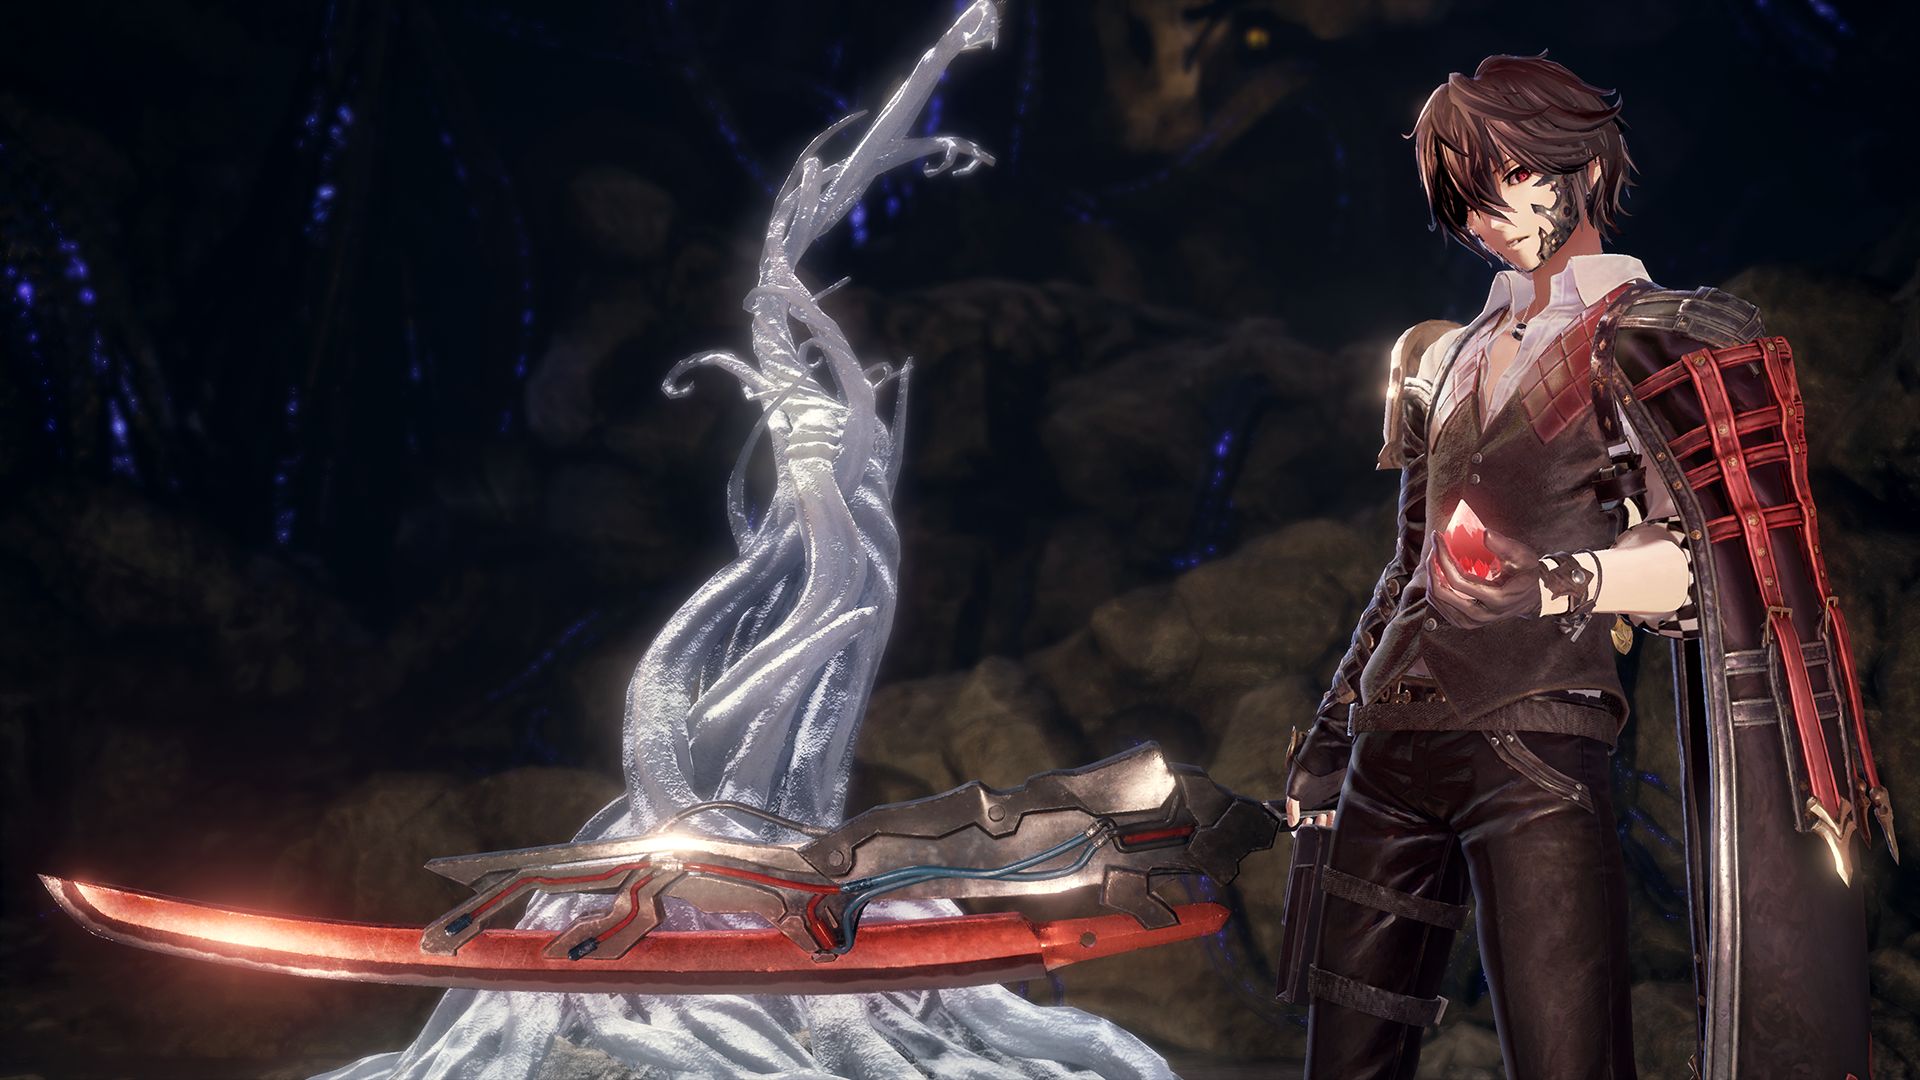 The demo for CODE VEIN is available now on PS4 and Xbox One